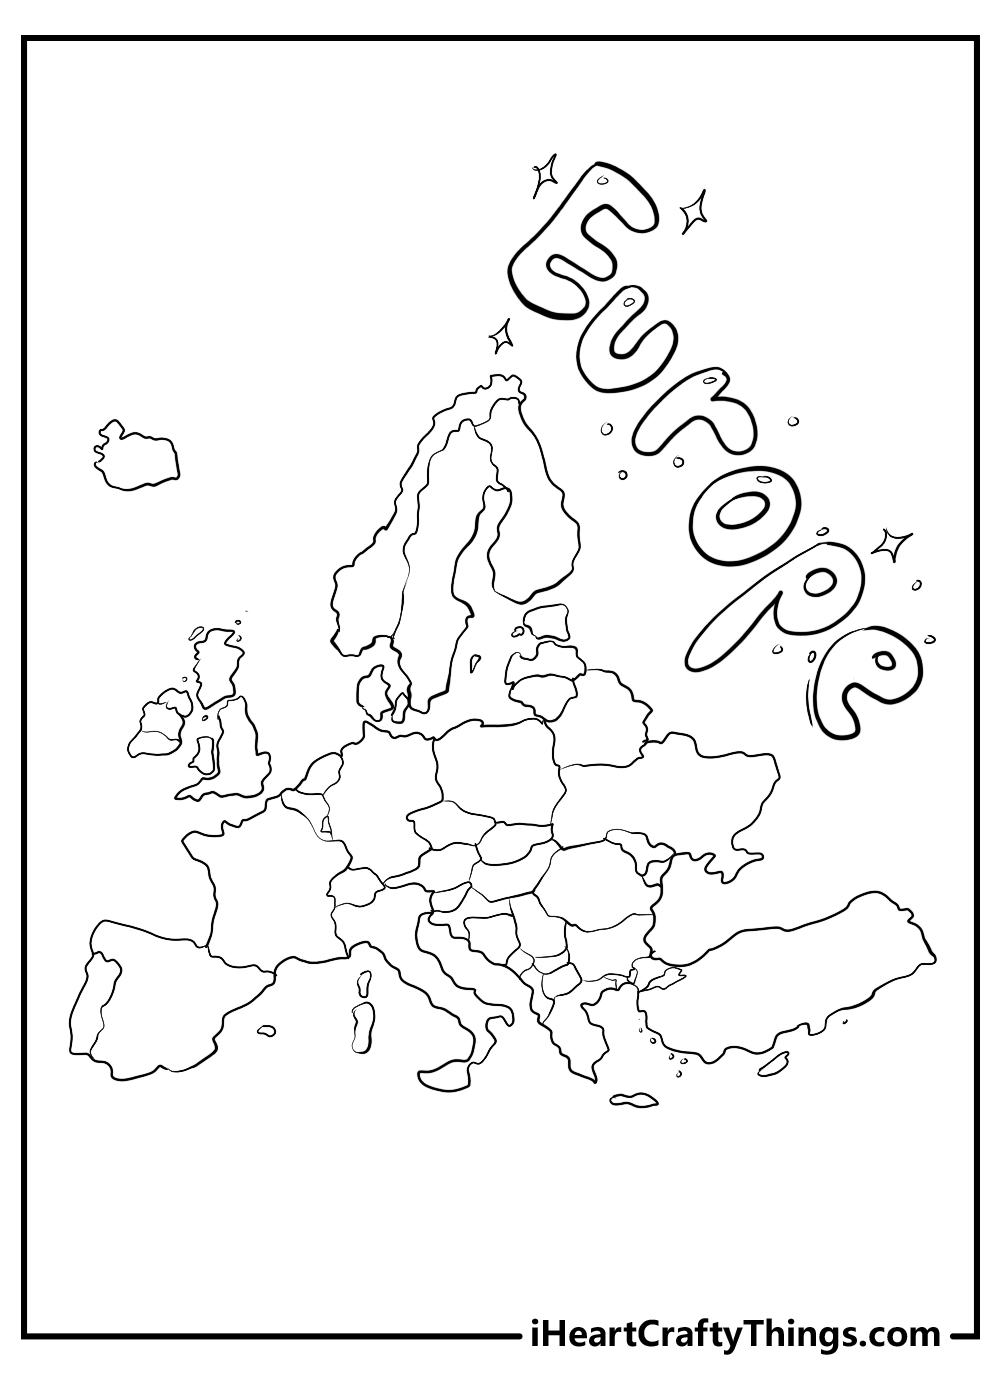 original world map coloring pages